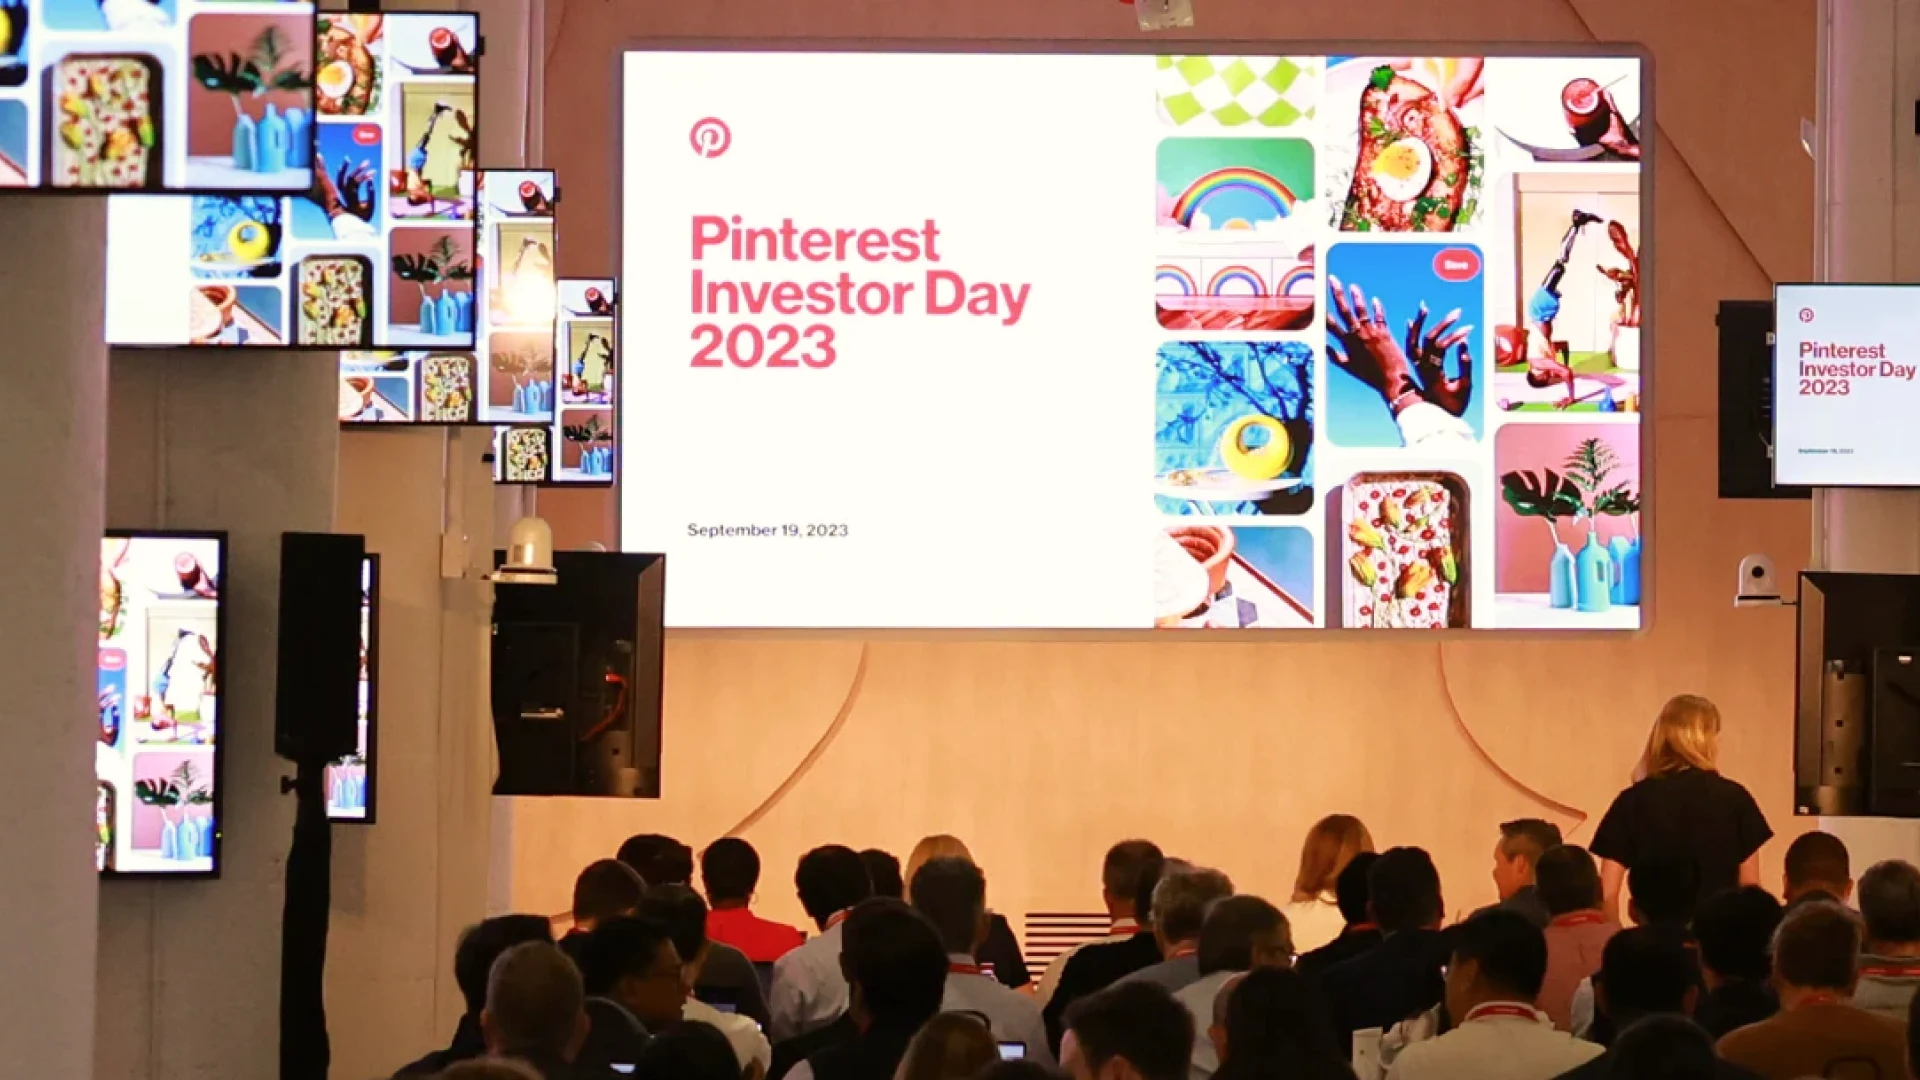 A crowd gathers at the Pinterest Investor Day stage